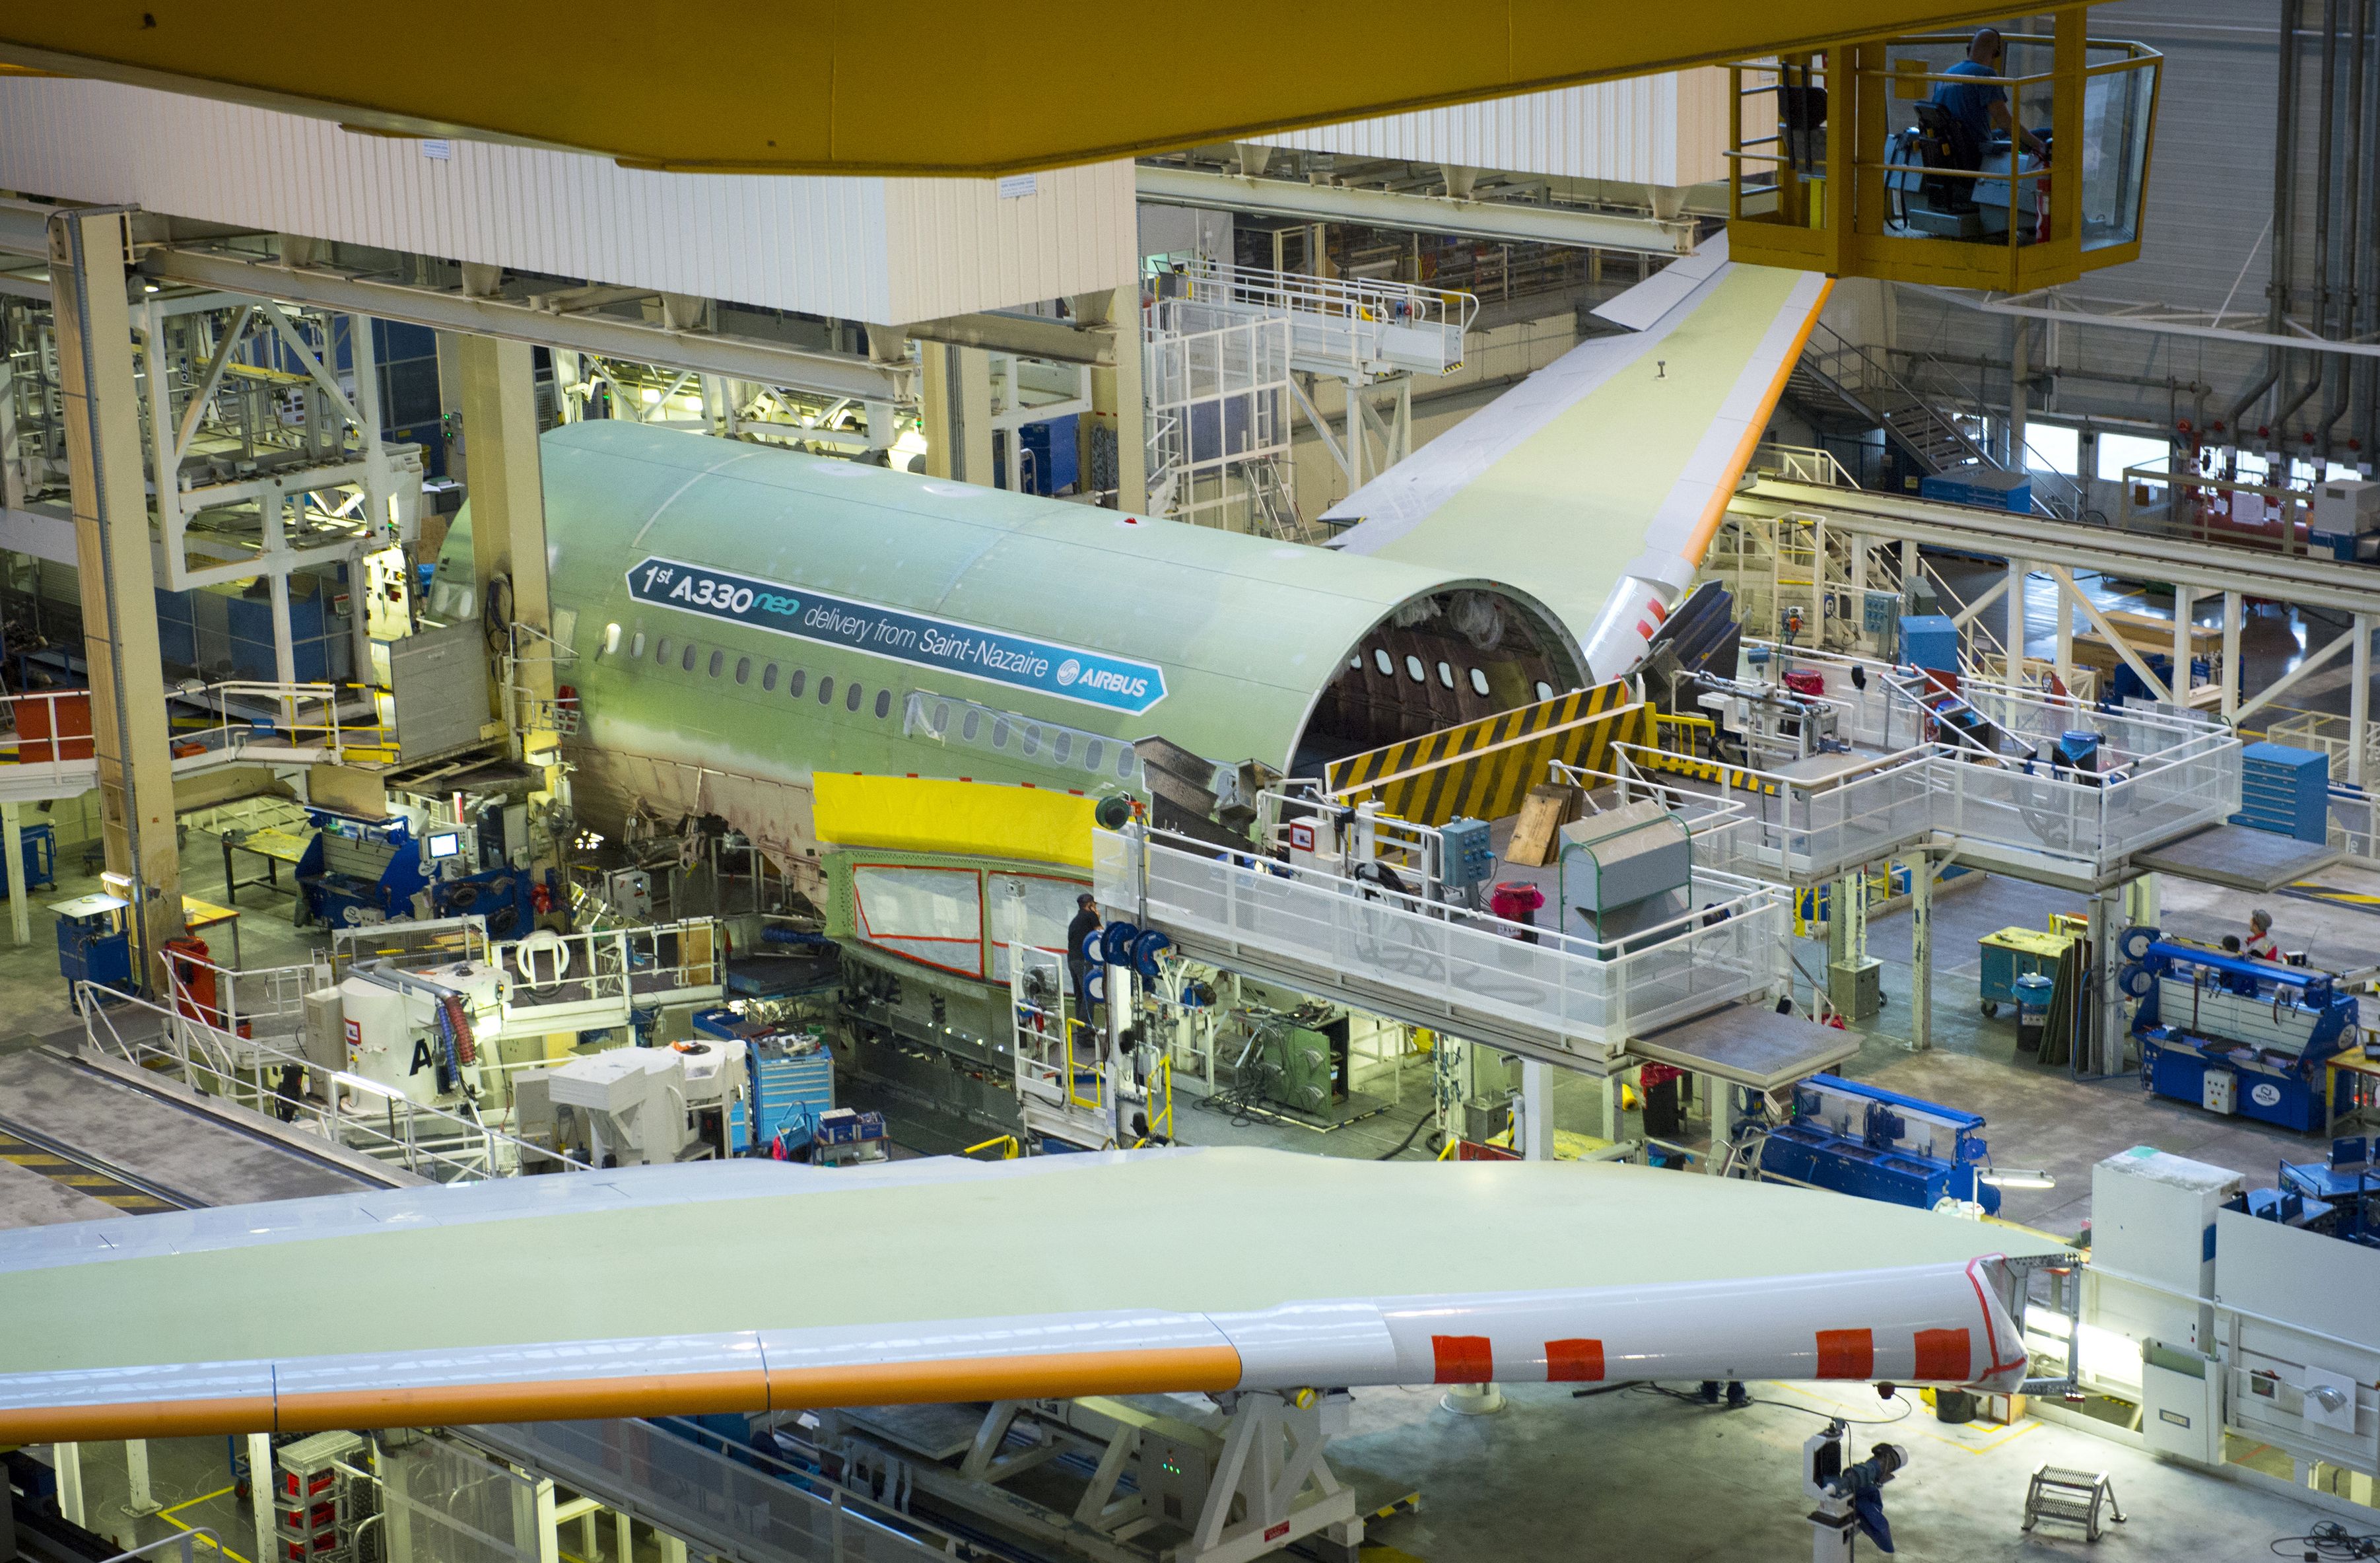 An Airbus A330 being assembled at the factory.